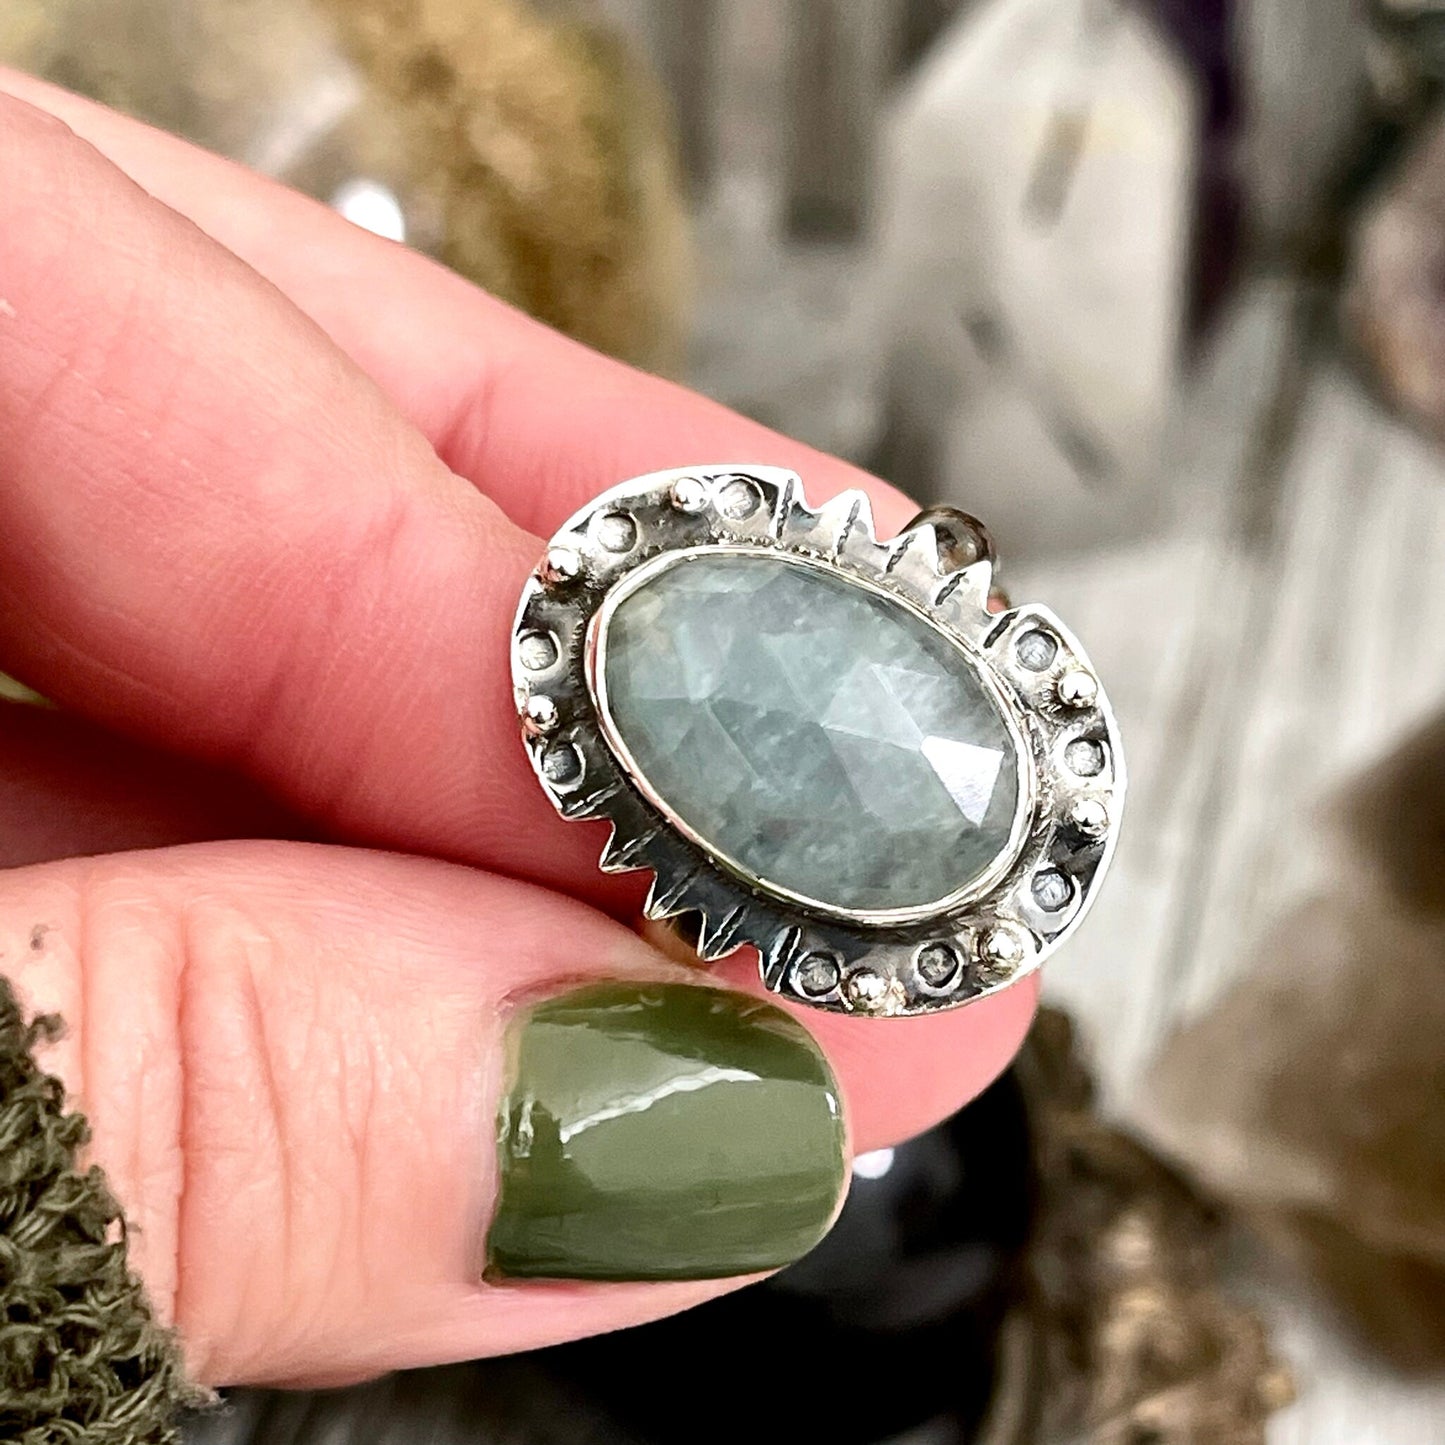 Aquamarine Oval Crystal Statement Ring in Sterling Silver Available in Size 8 9 10 - Foxlark Crystal Jewelry